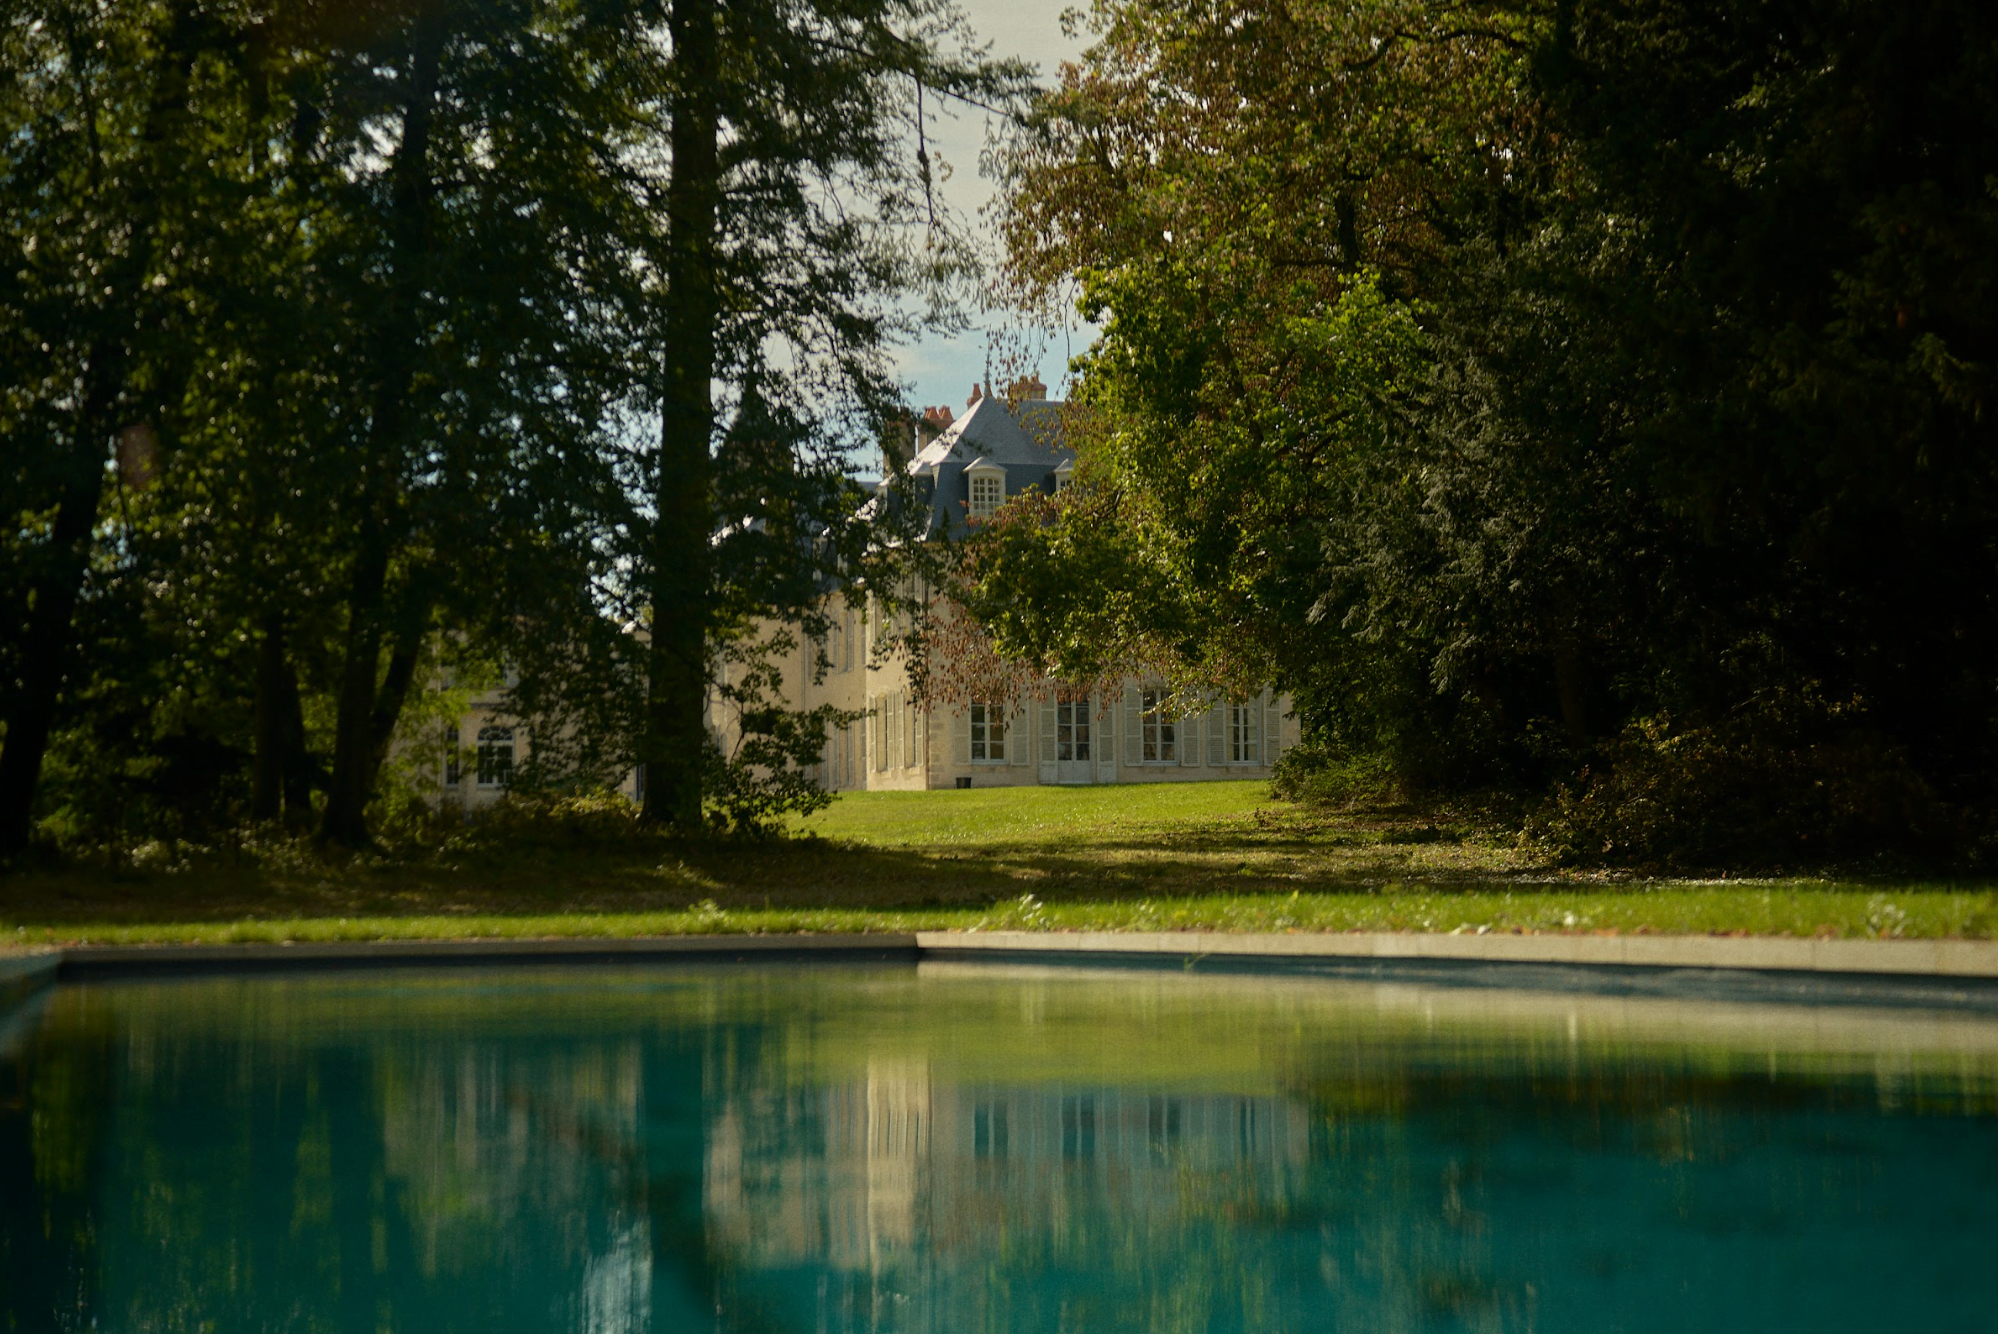 The swimming pool of Château de Thauvenay amidst the lawn and trees